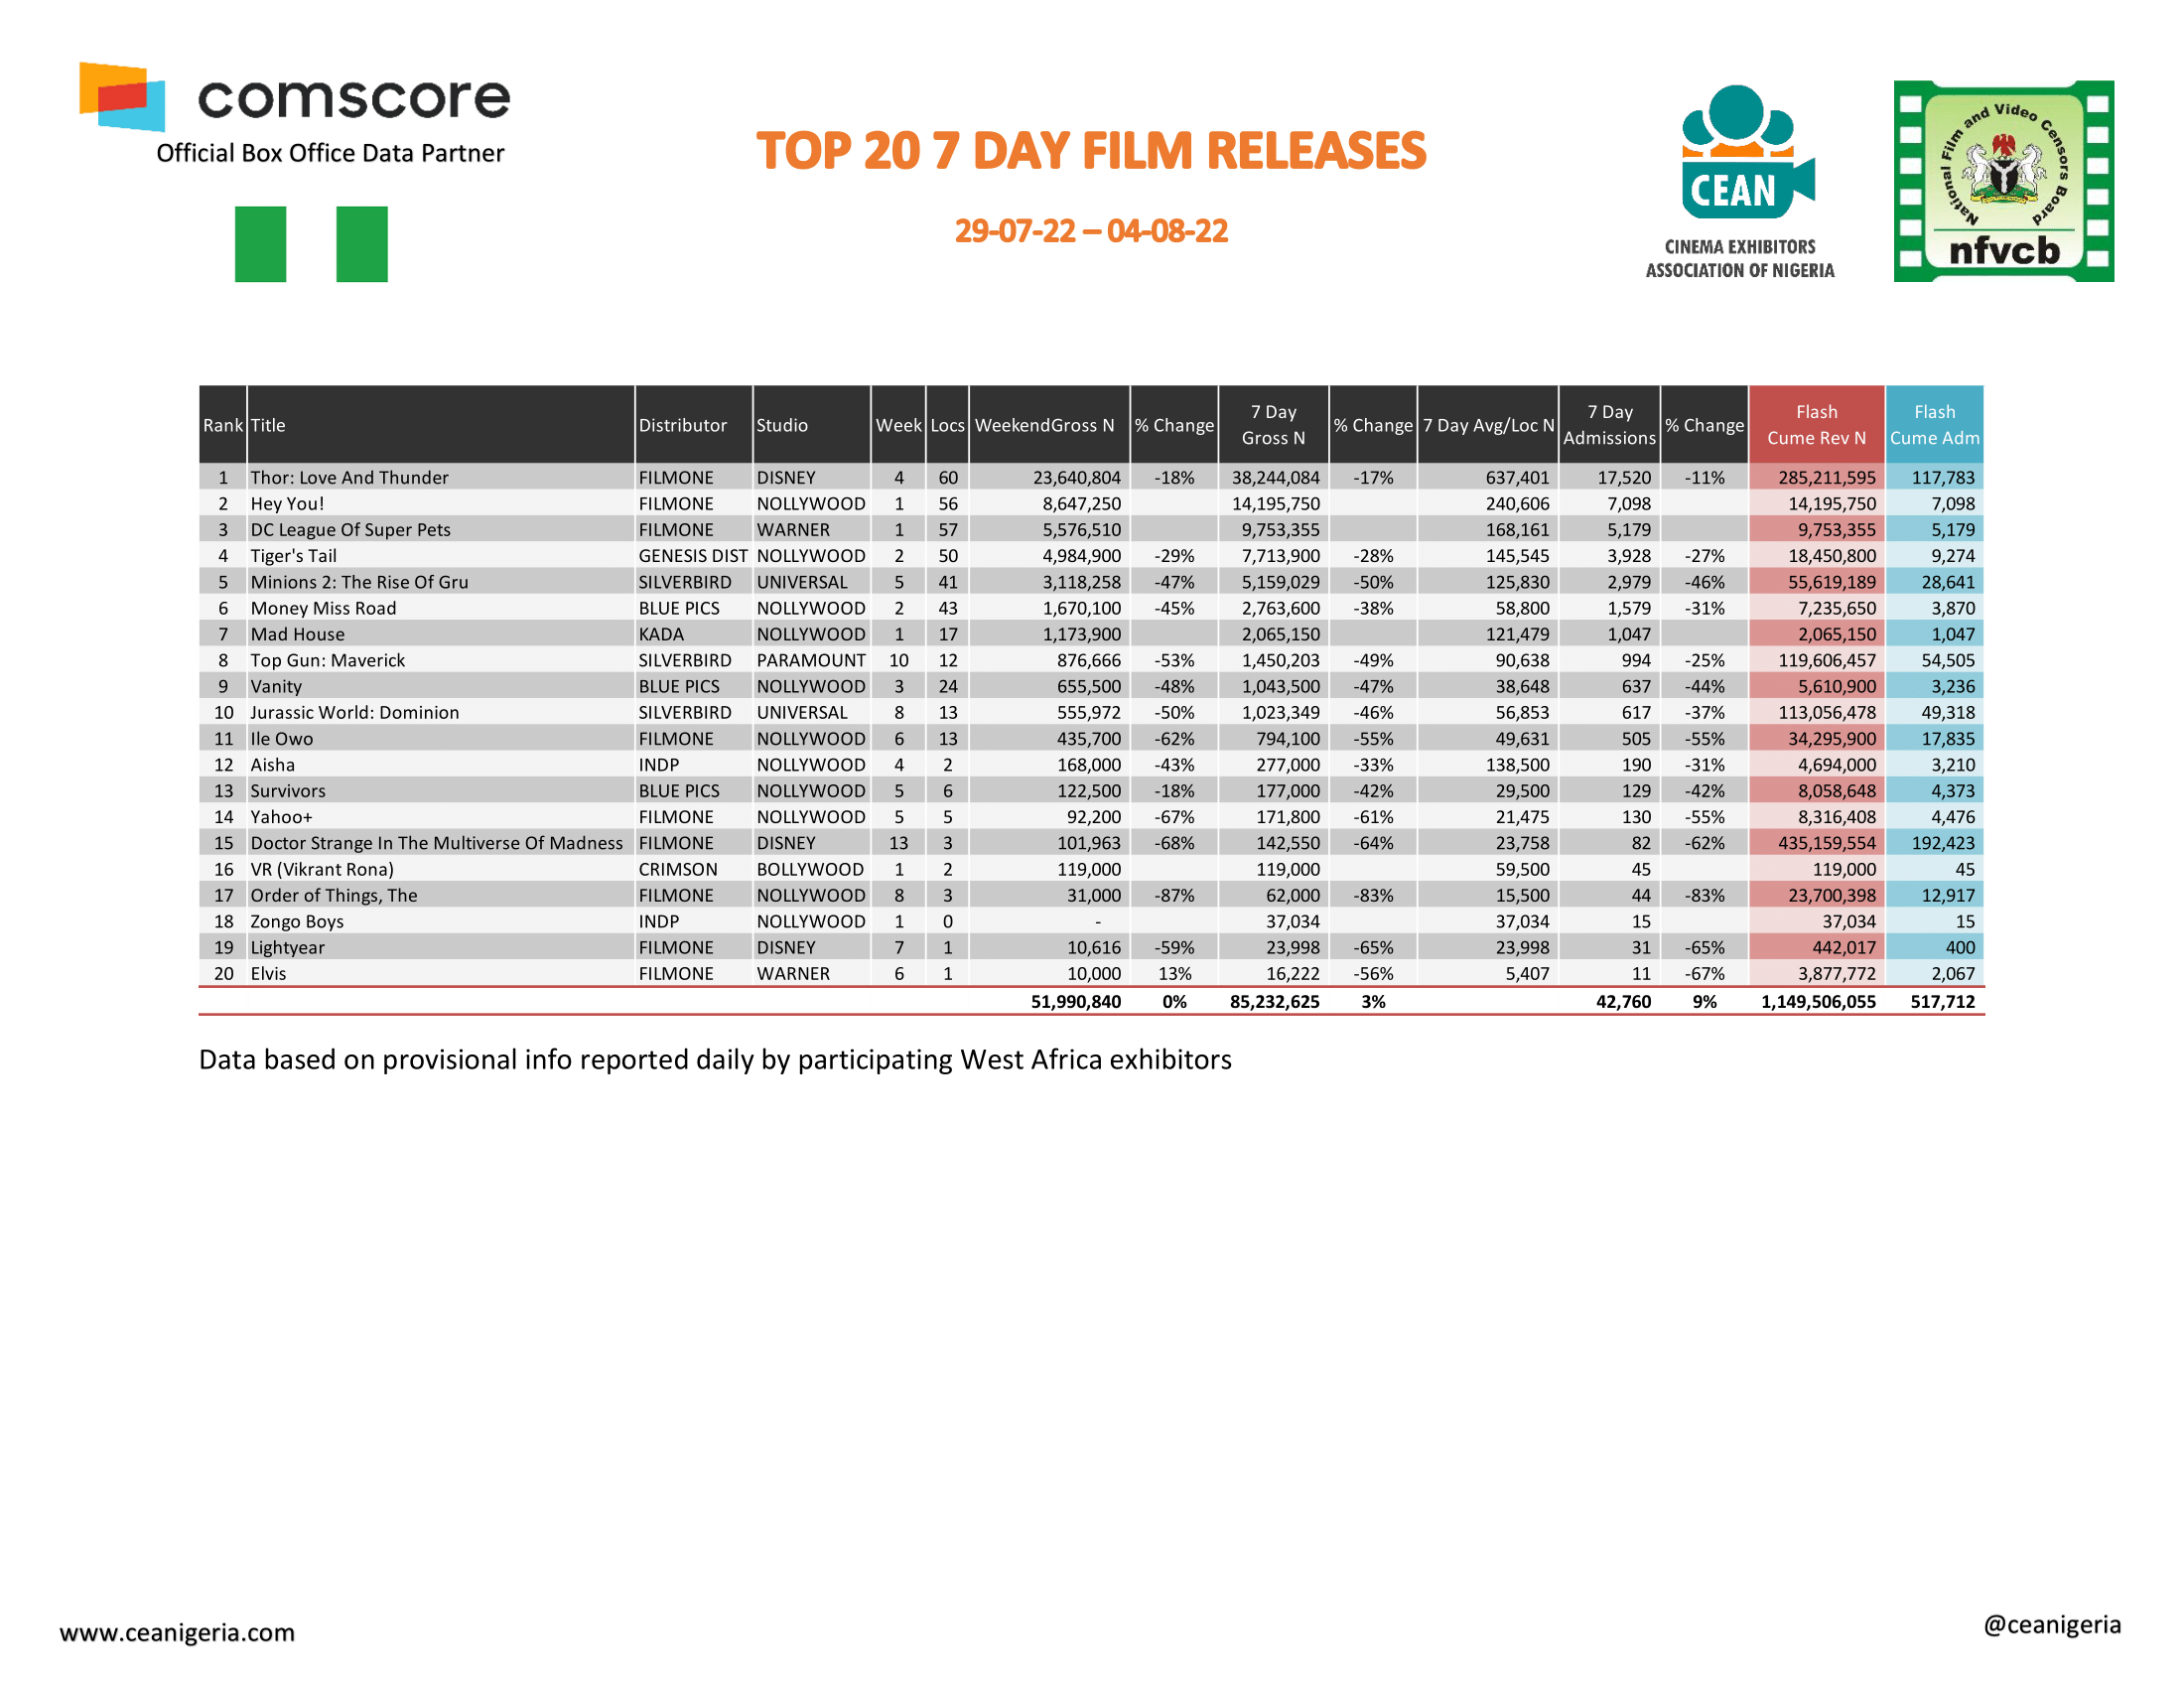 Top 20 films 7 Day 29th July 4th August 1 1